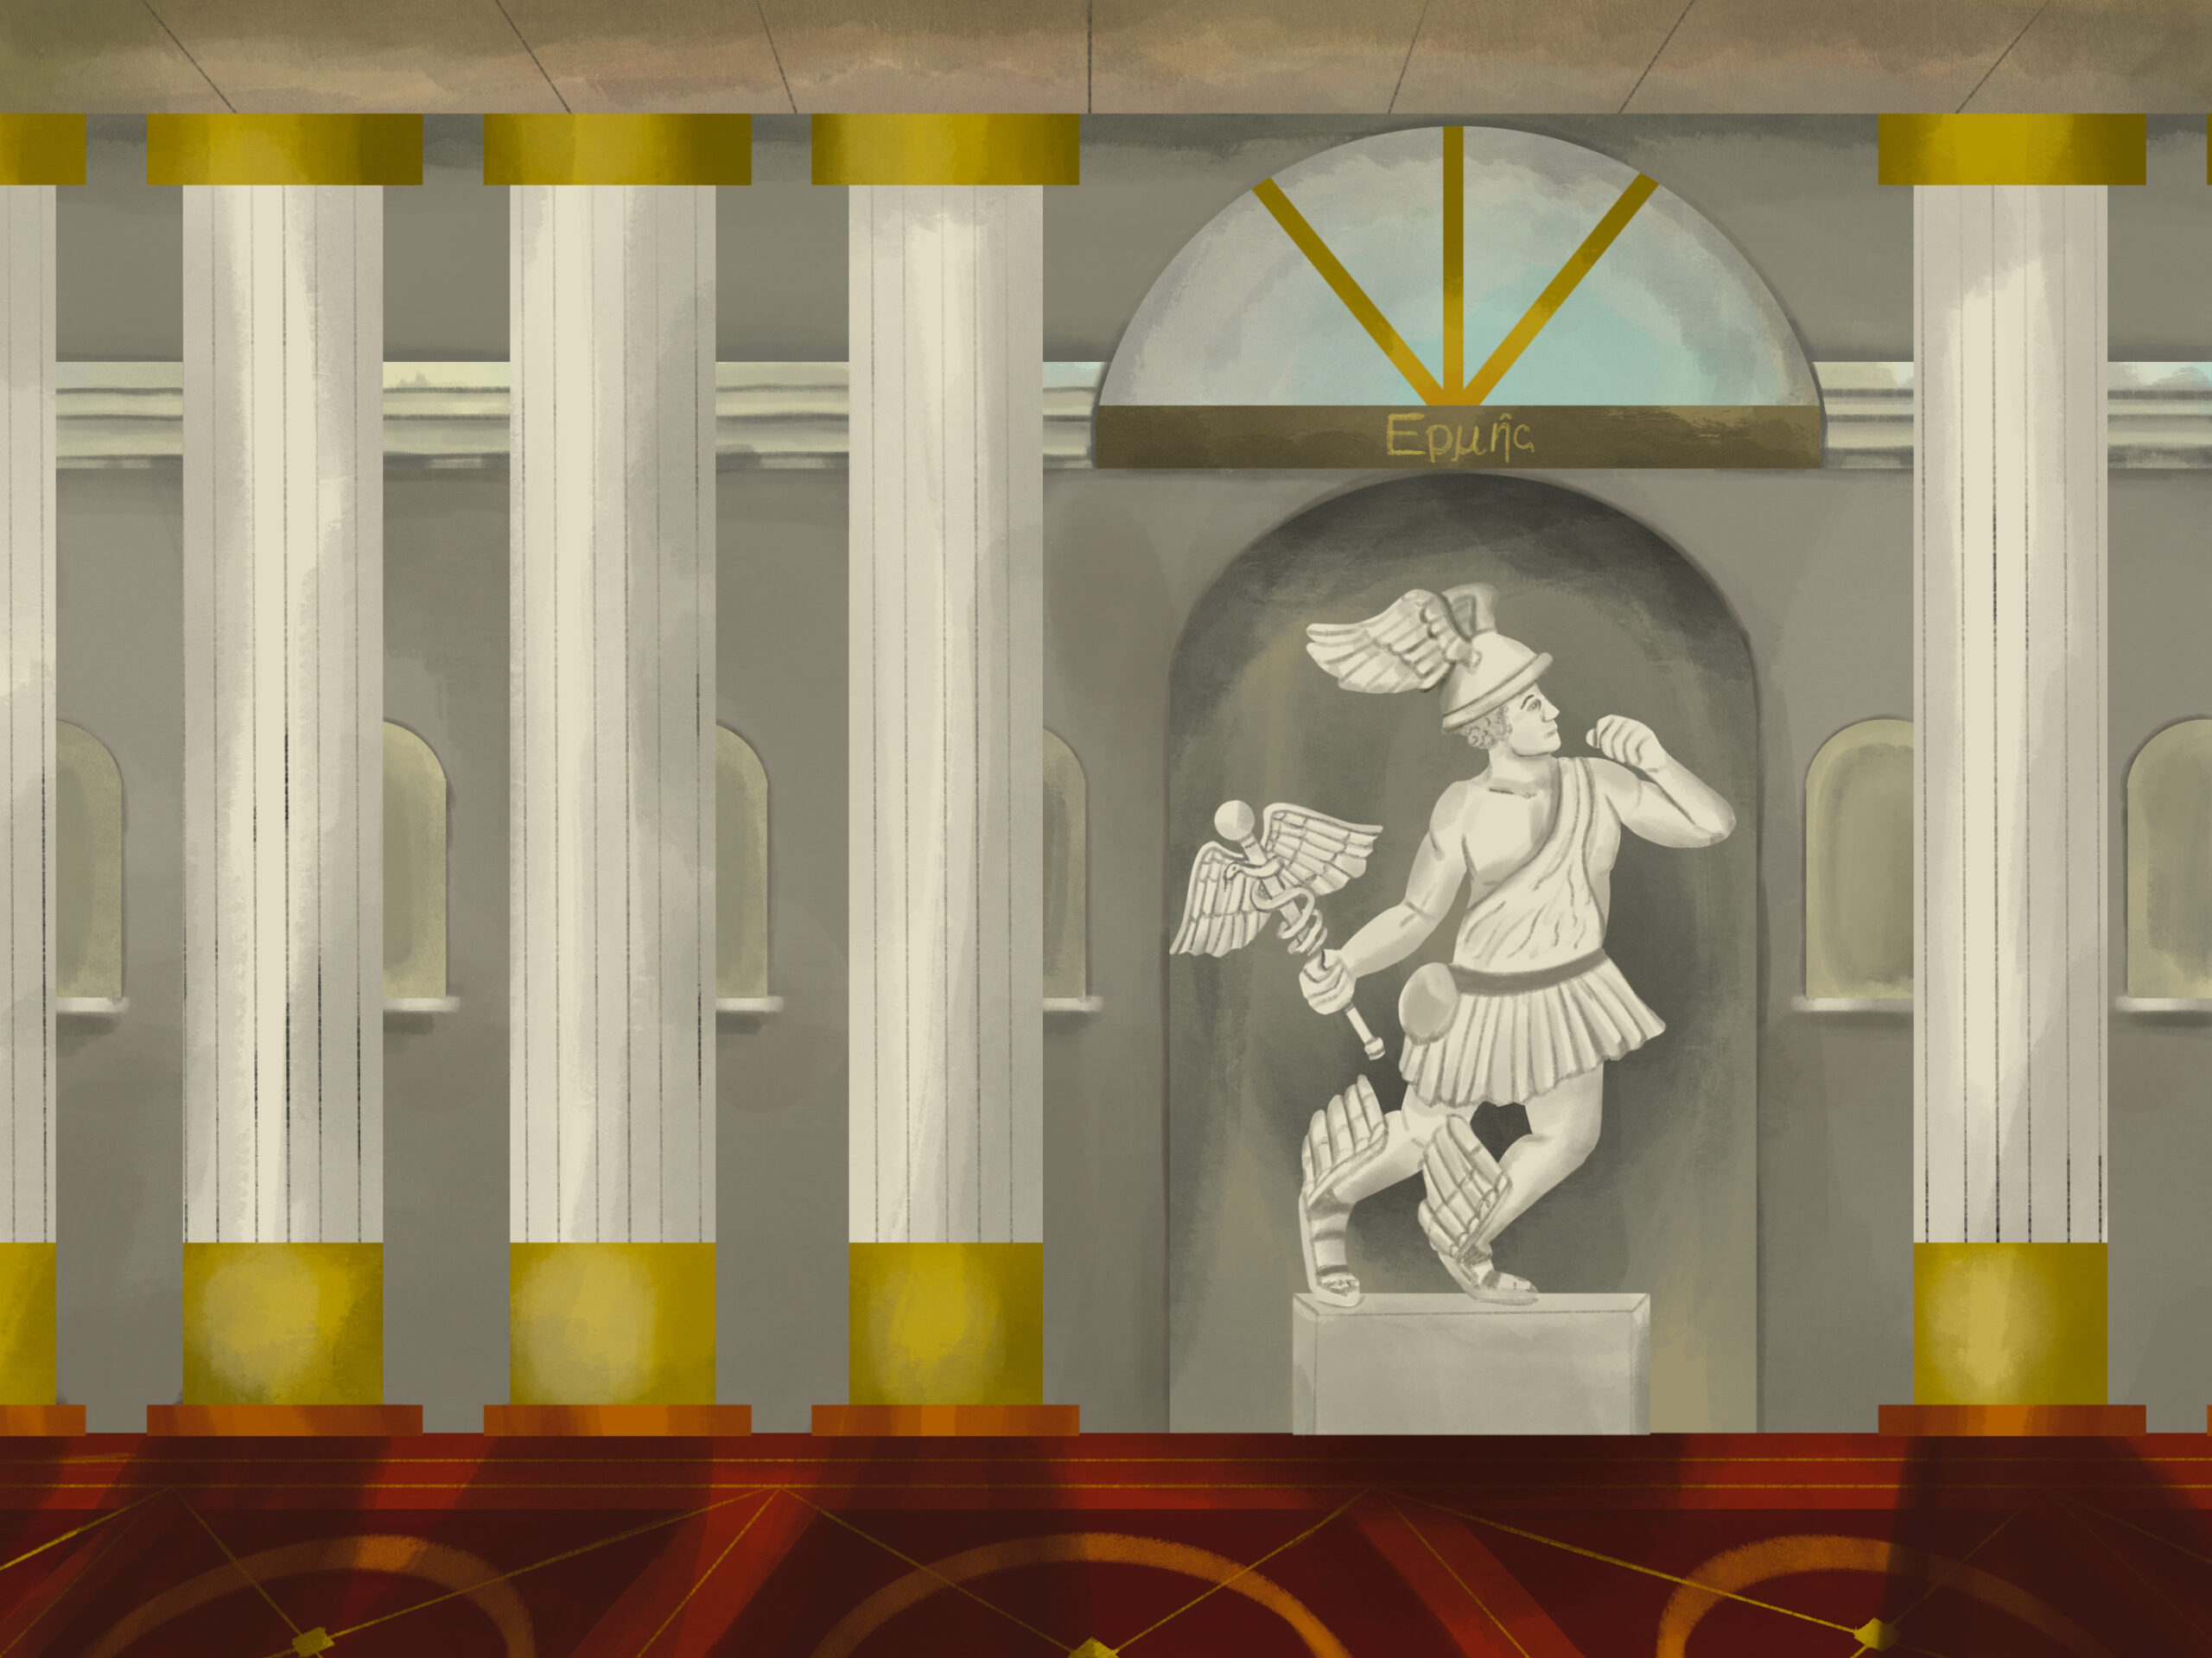 Inside Hermes' Temple. A large marble statue of Hermes stands over detailed red tiling and golden pillars inside the temple. The statue of Hermes has his cadeceus in hand as well as his signature winged helmet and sandals.